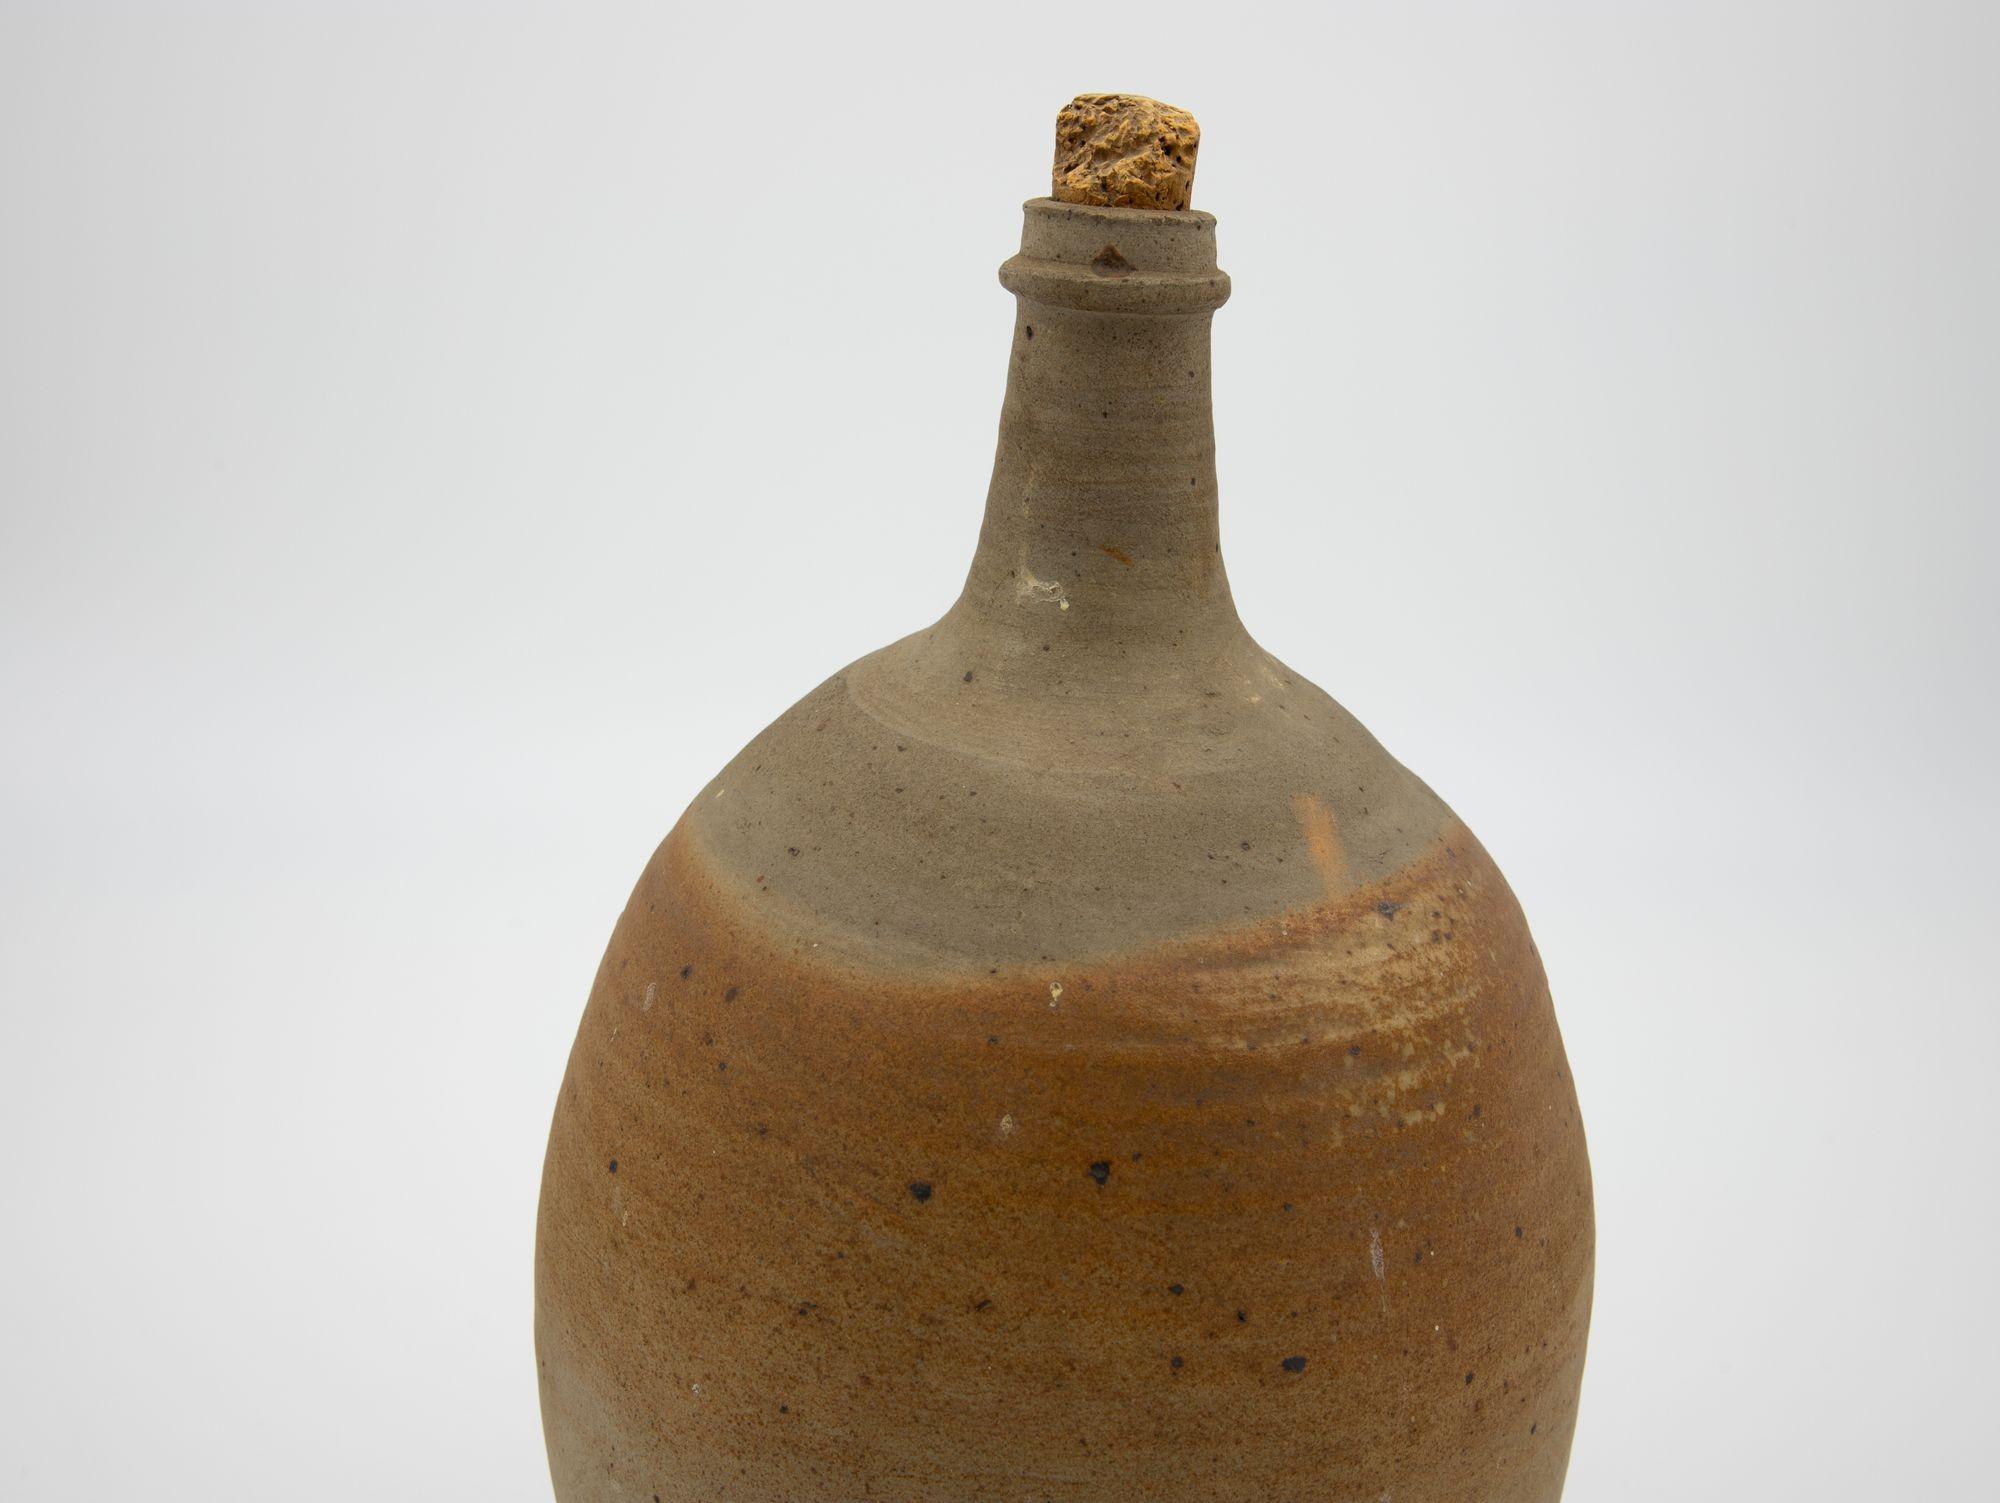 Late 19th century French earthenware pottery bottle or jug from Normandy. Originally used for water or cider.